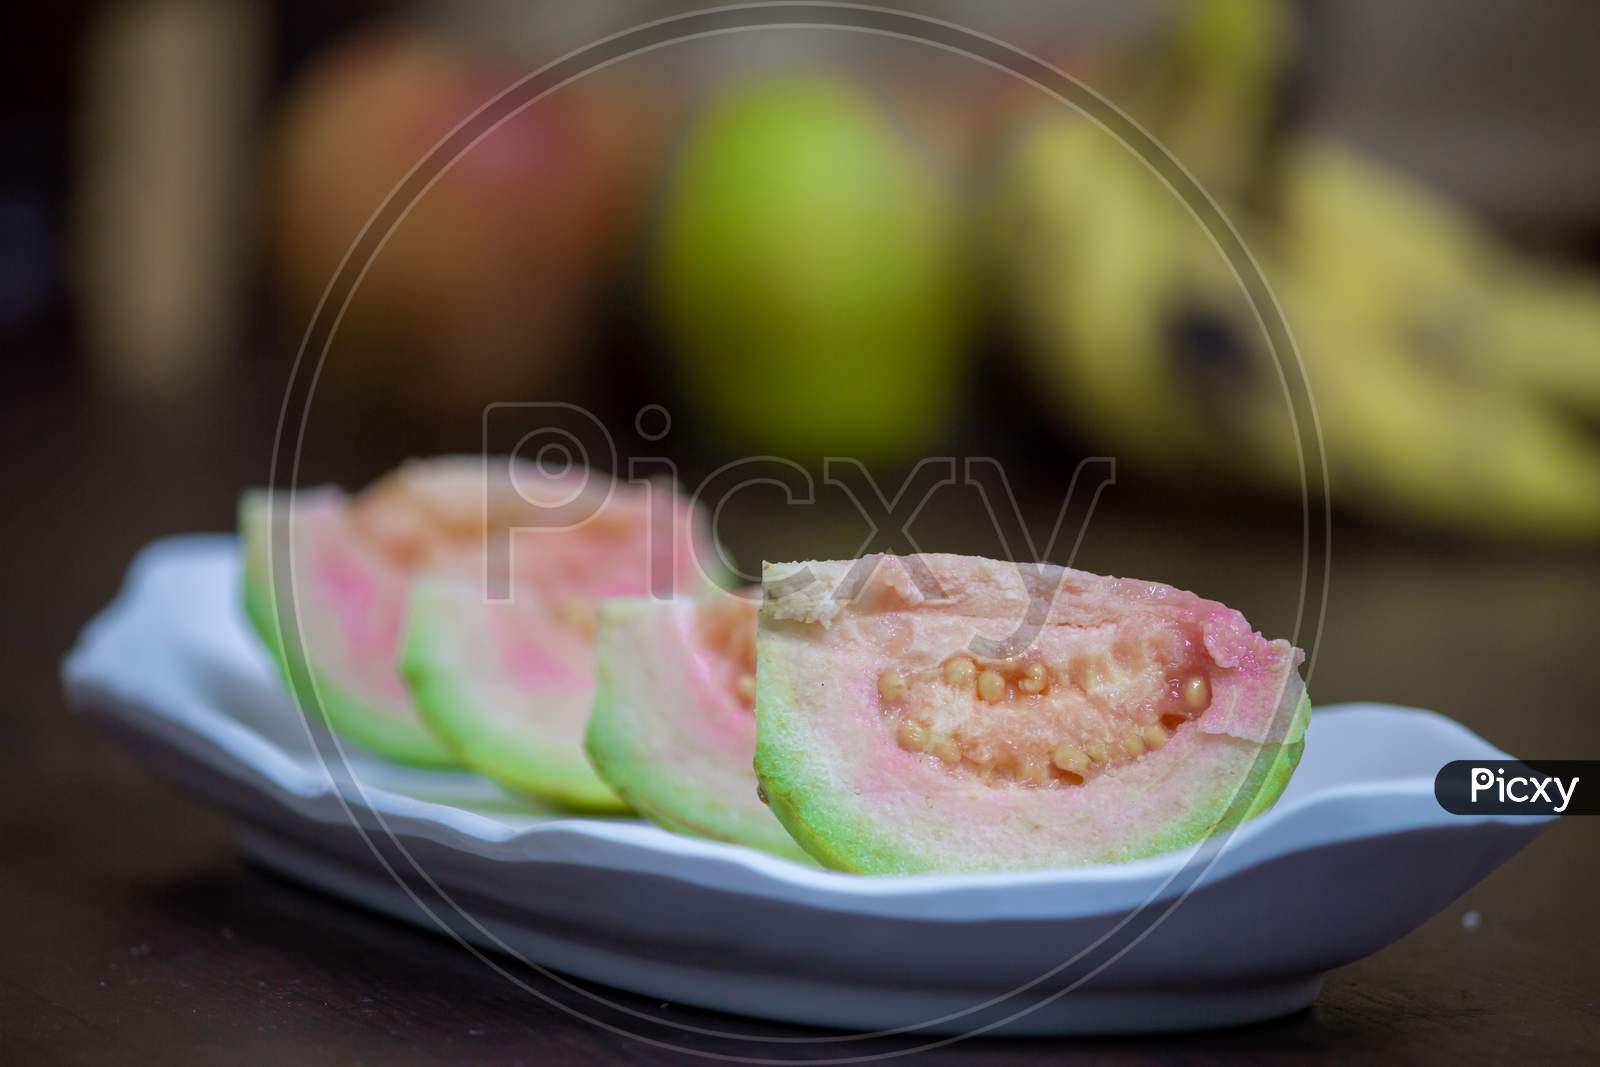 Slices Of Guava Fruit In A Plate. Guava Is A Tropical Fruit Which Are Rich In Dietary Fiber And Vitamin C